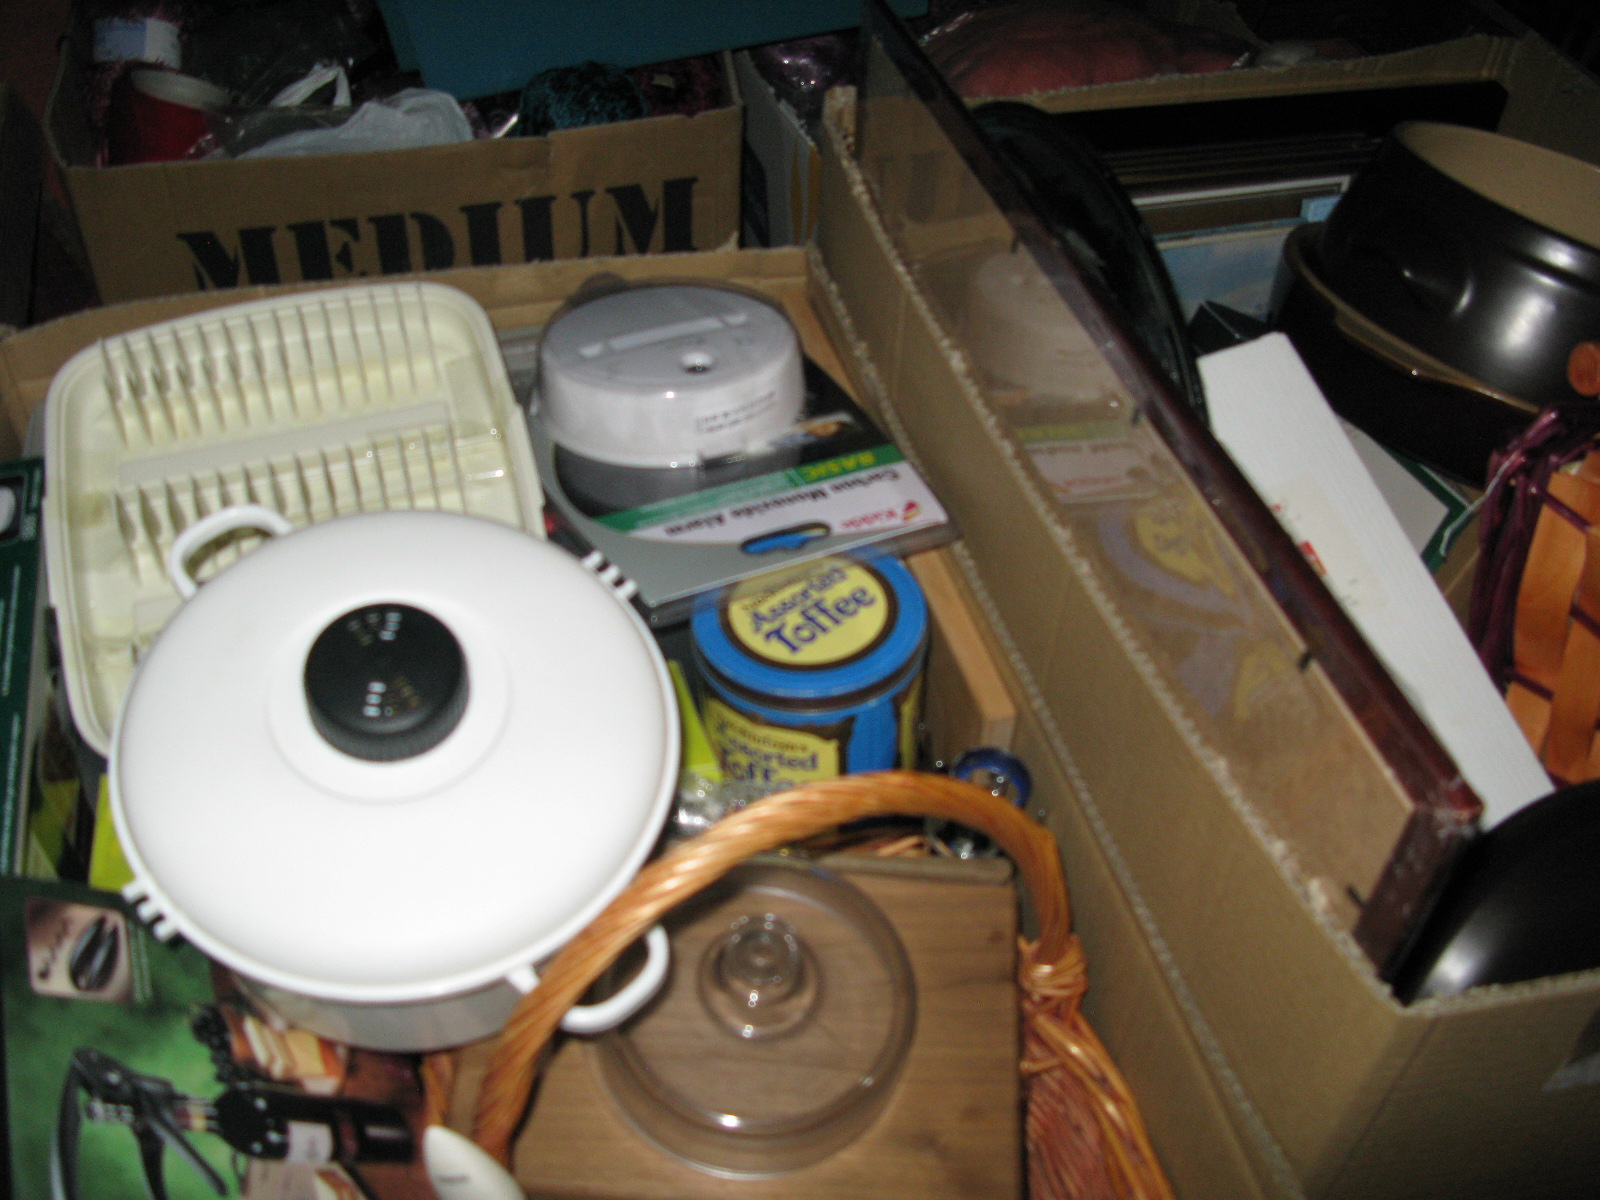 Kitchenalia, bowls, dishes, baskets, fire alarm, photo frames, wine carrier, etc:- Two Boxes